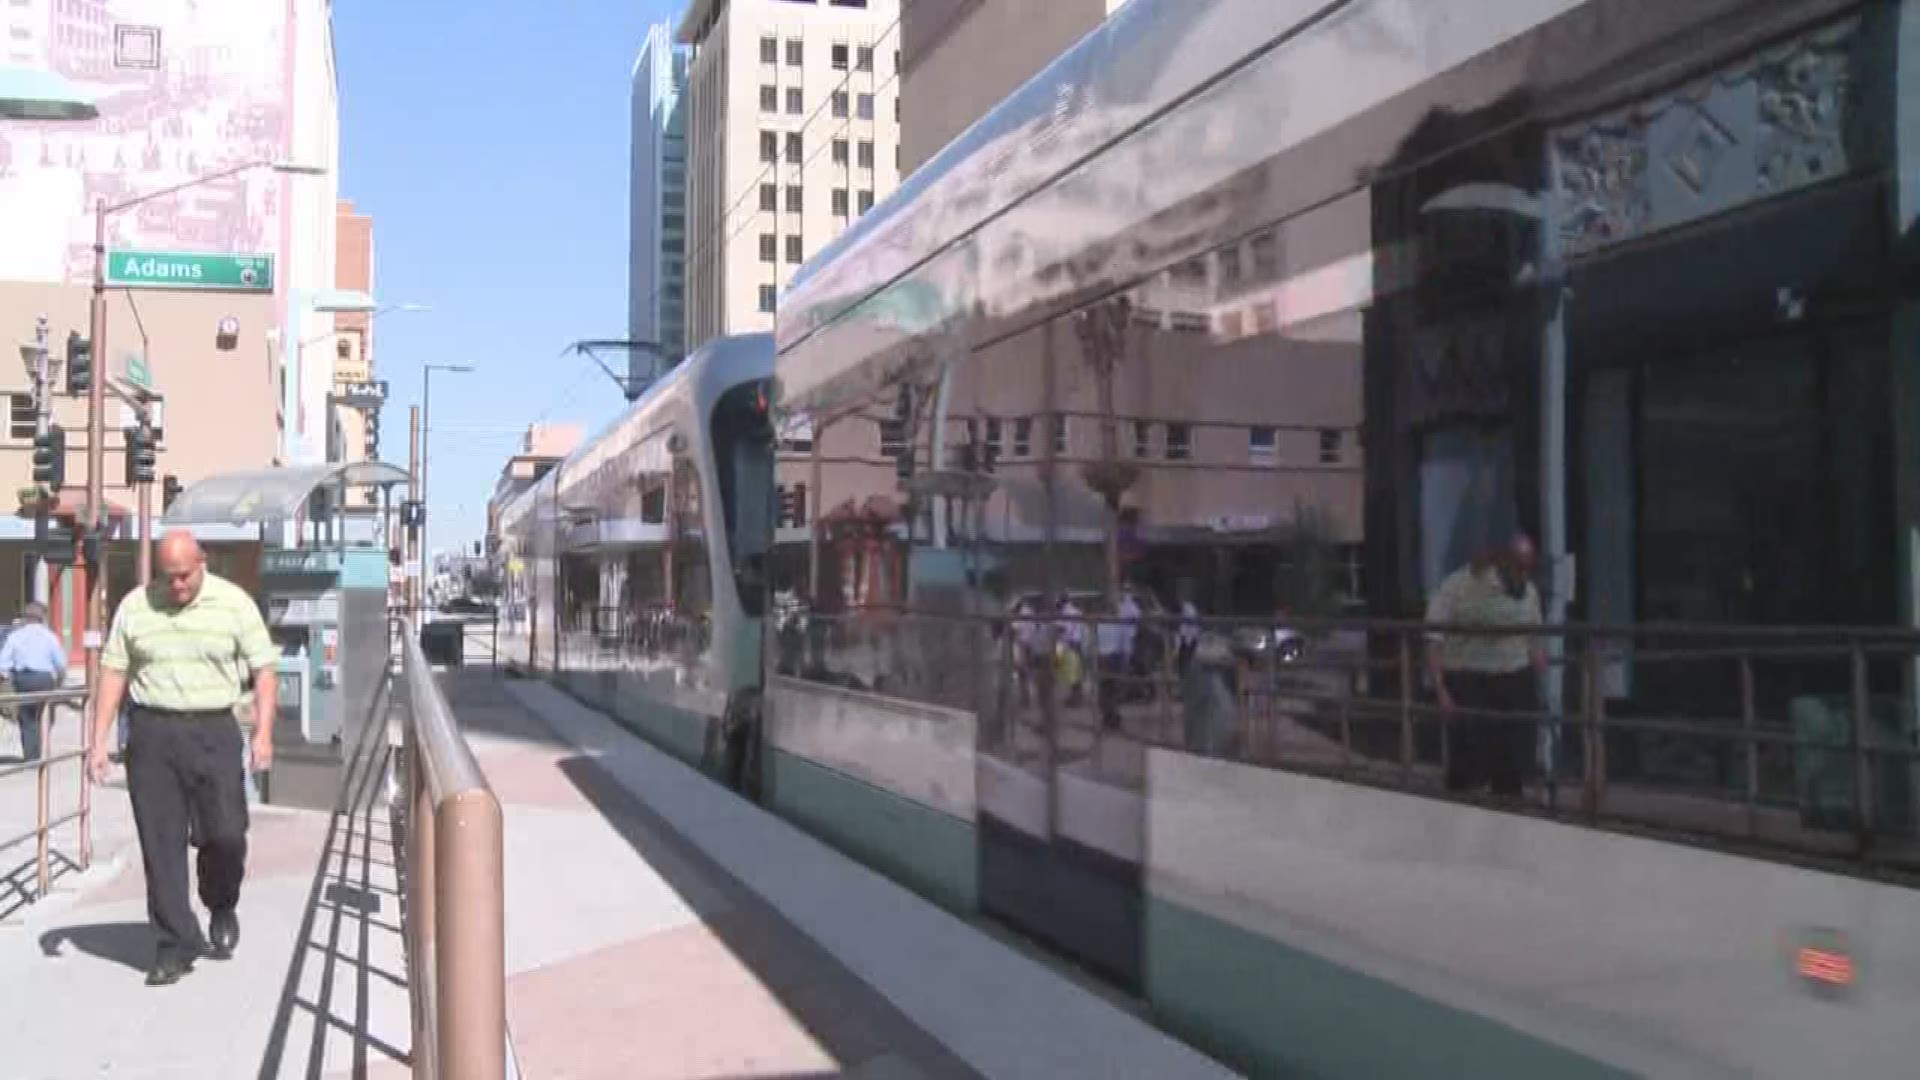 The vote is controversial, with some small business saying the construction time to extend the light rail will put them out of business. However, city council moved forward with the approval.